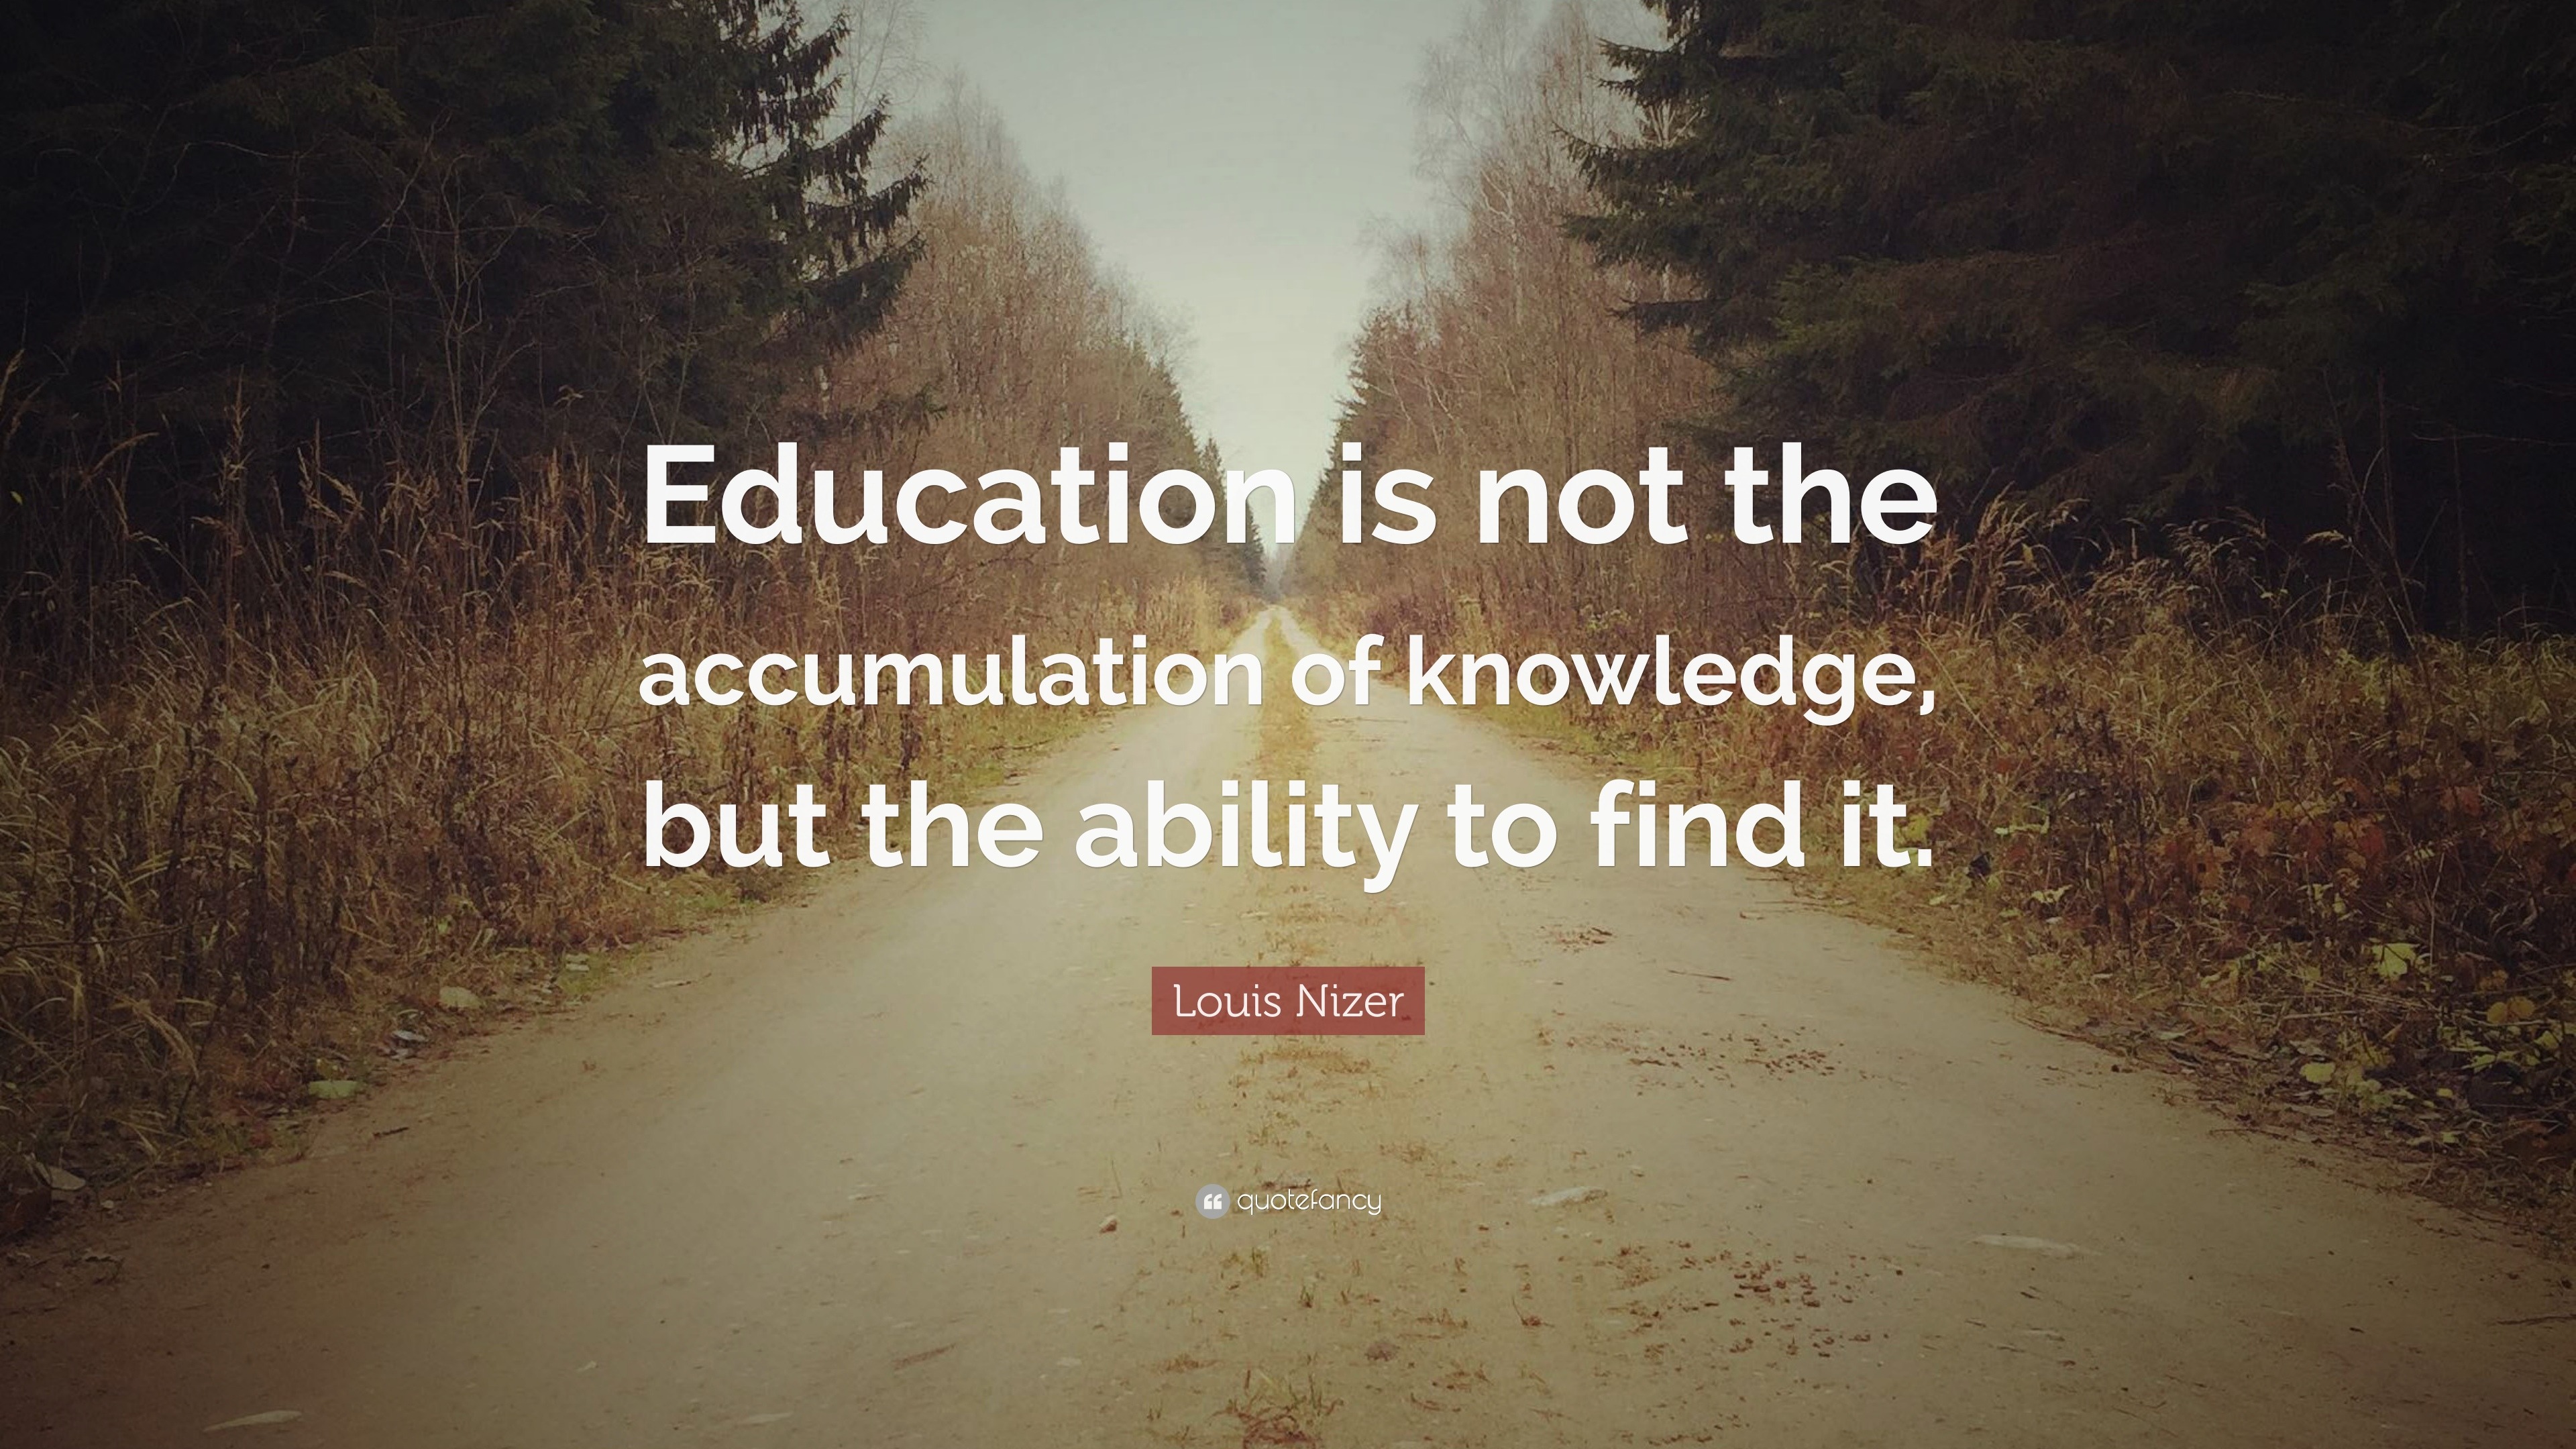 Louis Nizer Quote: “Education is not the accumulation of knowledge, but ...